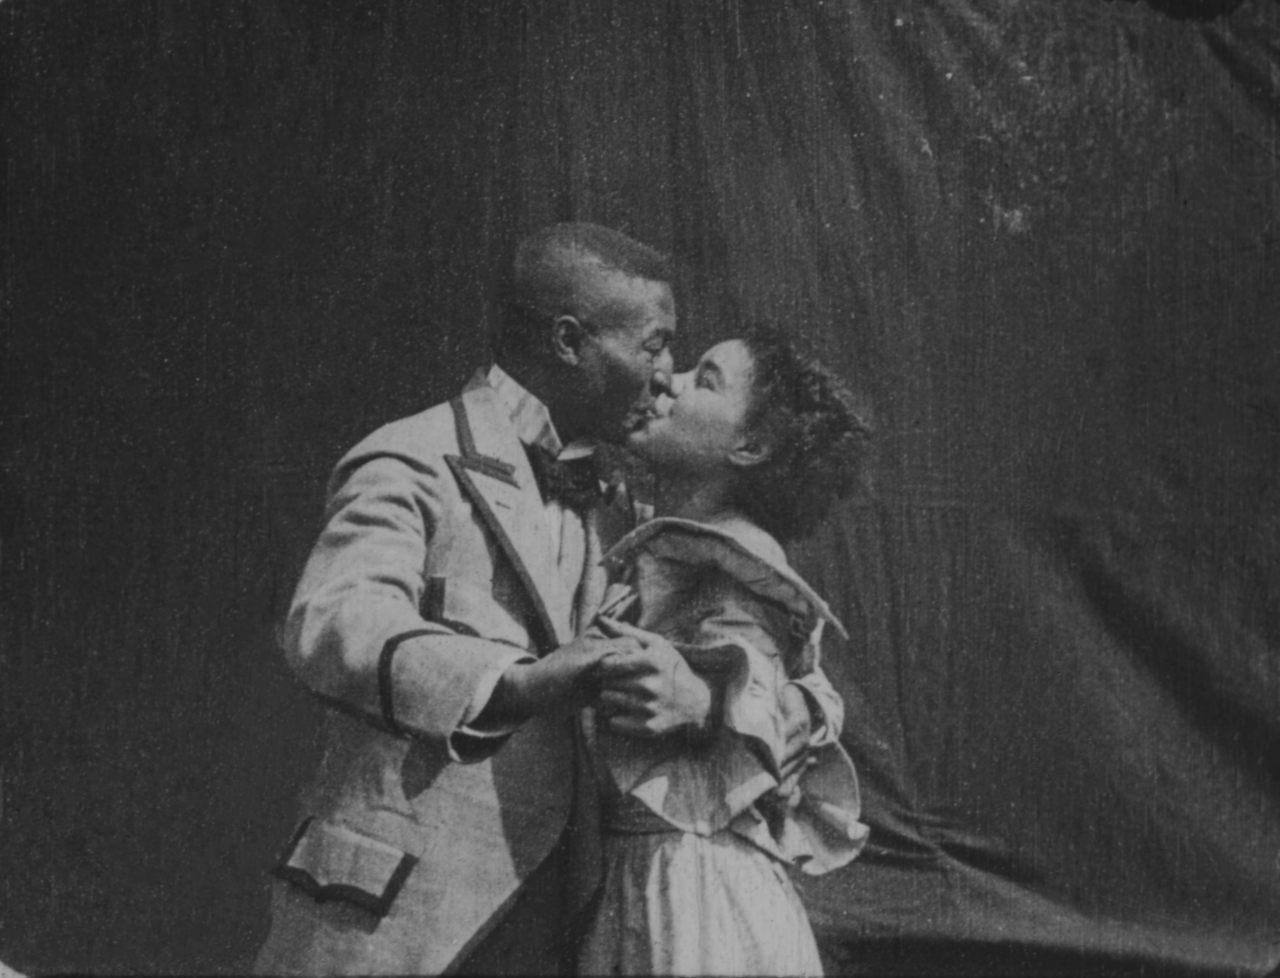 William Selig's 1898 short film <em>Something Good-Negro Kiss</em> is considered one of the earliest black films depicting black intimacy on screen.